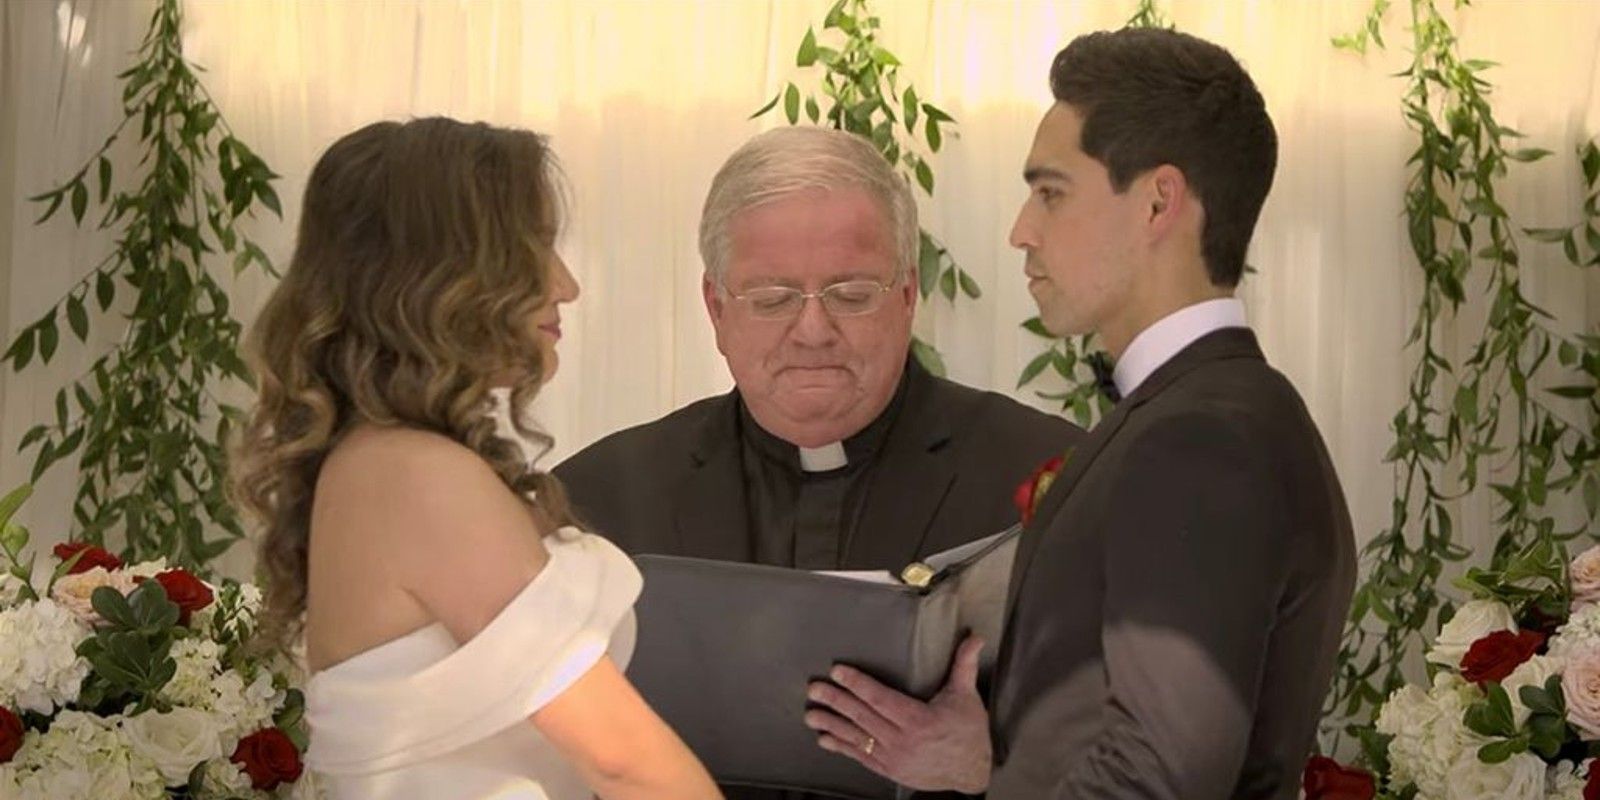 Salvador and Mallory getting married in Love Is Blind